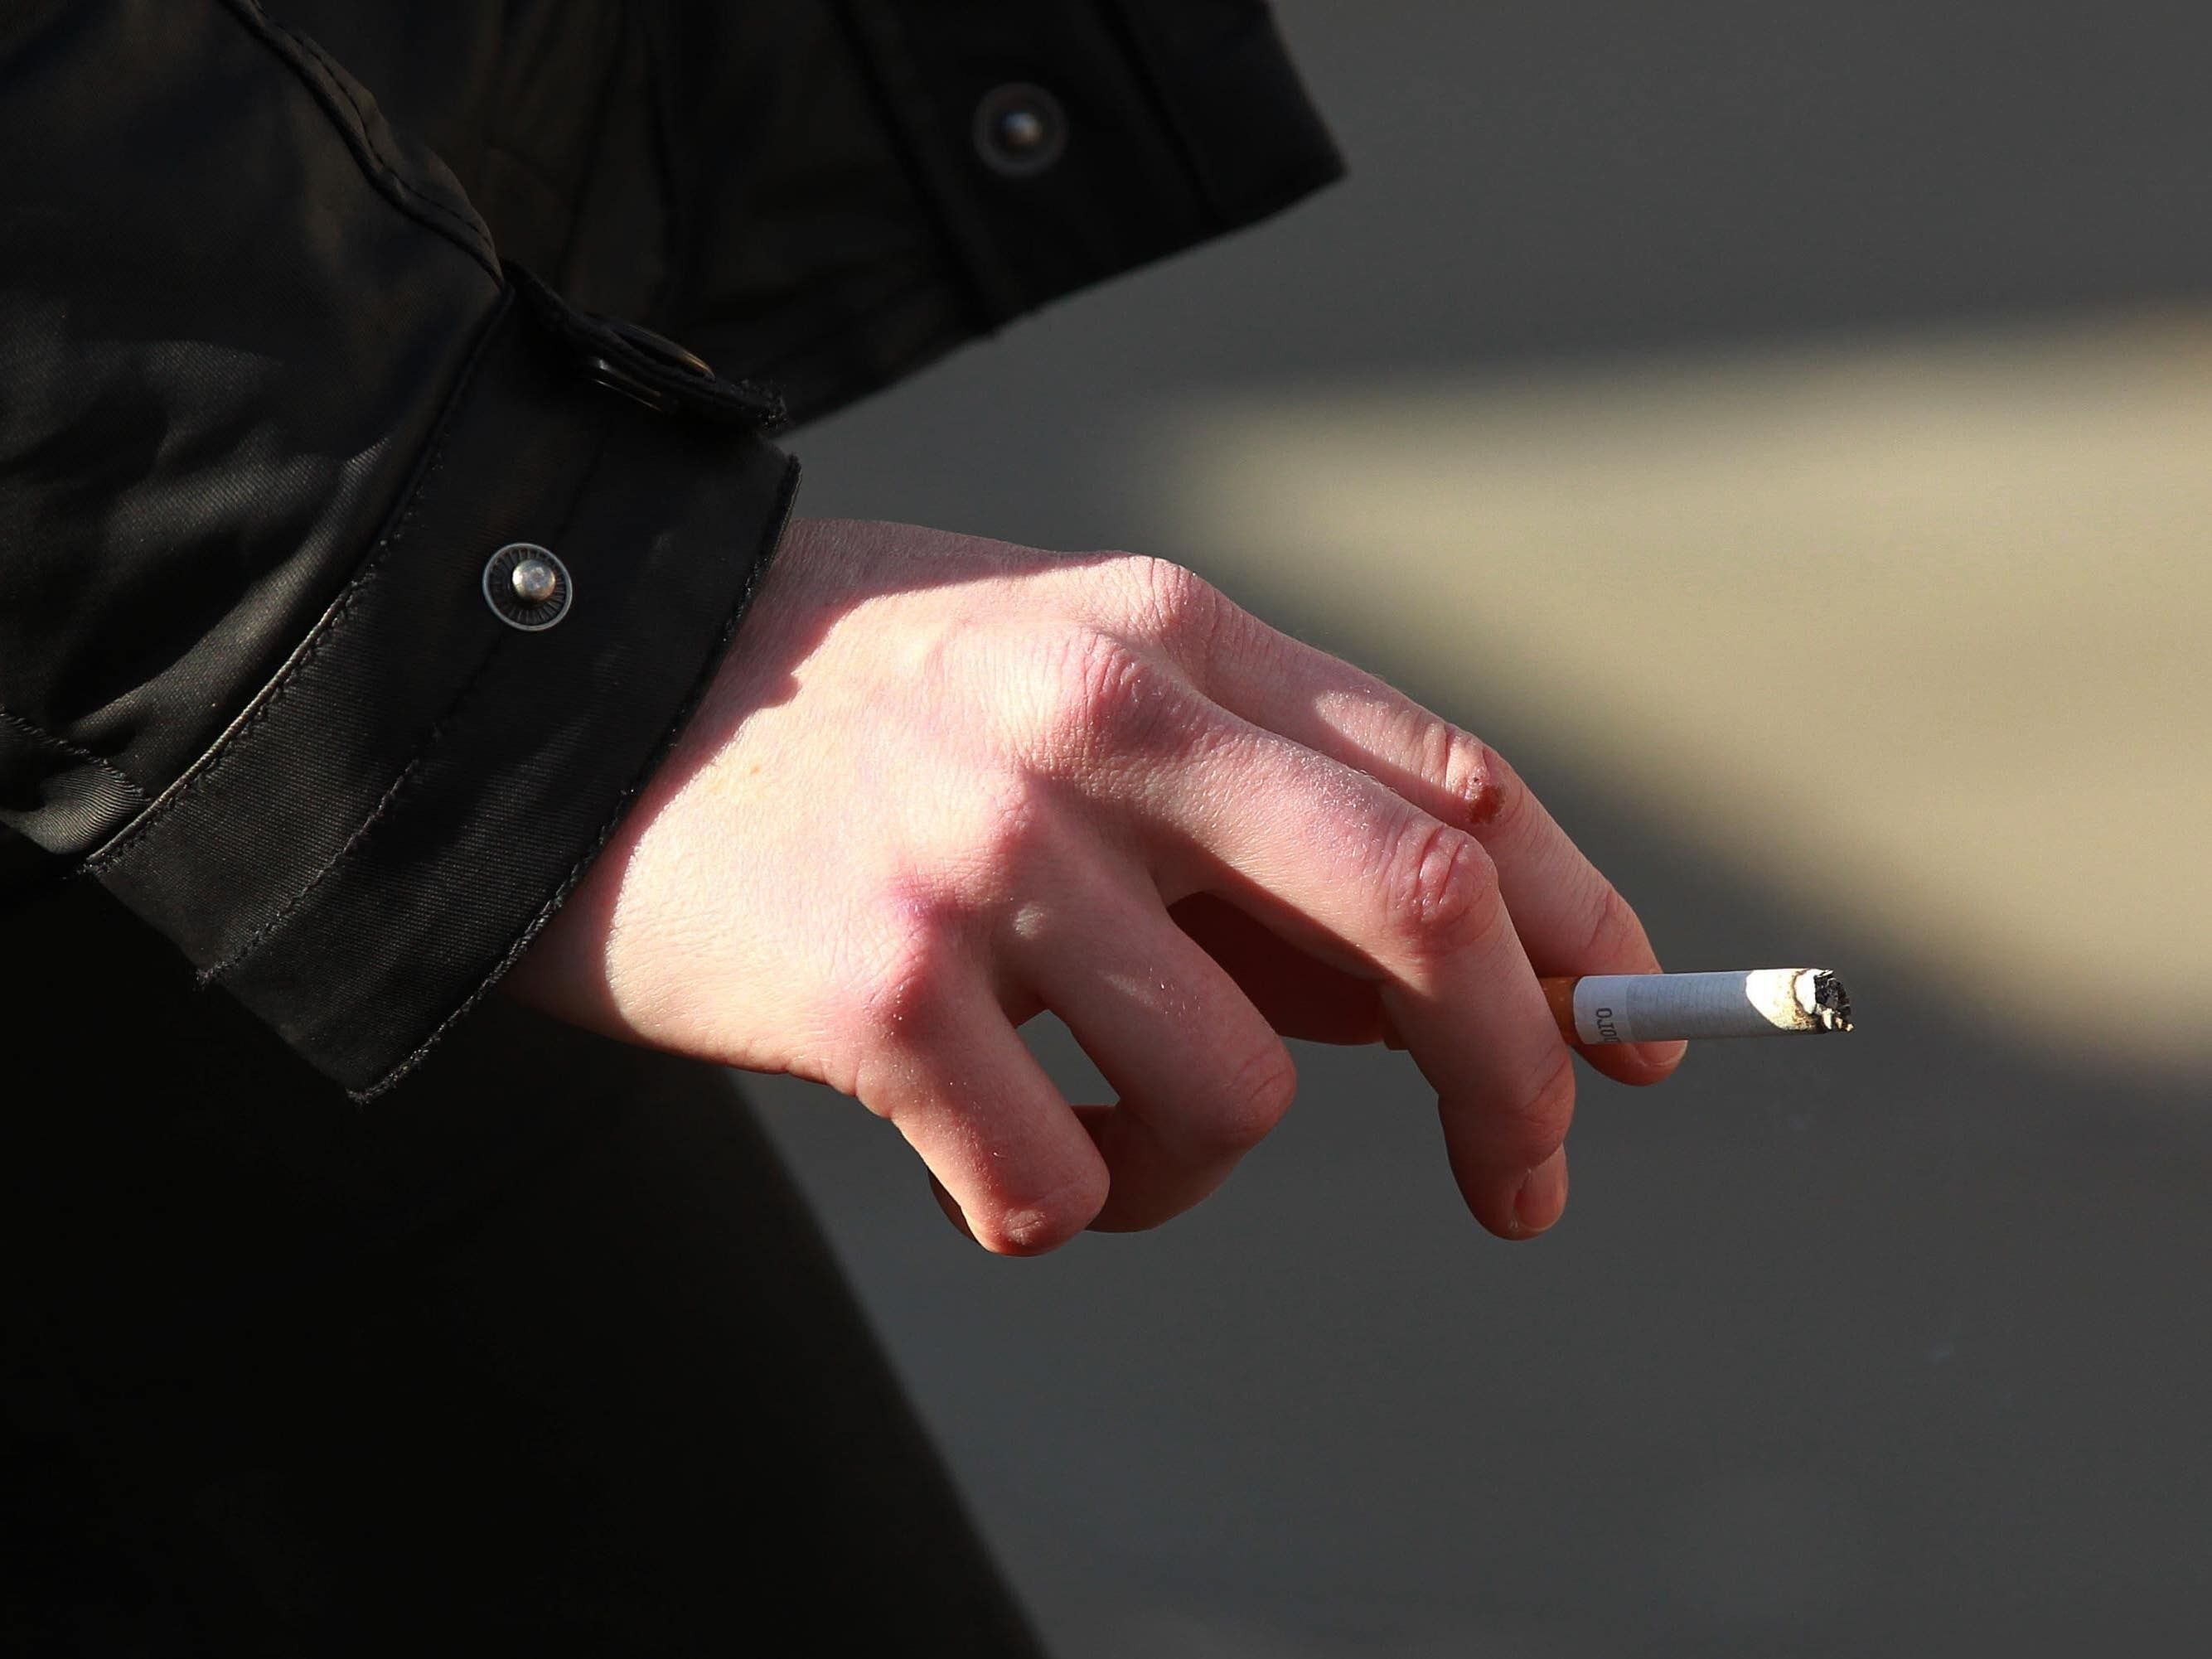 Semaglutide may show promise in helping people to stop smoking, researchers say